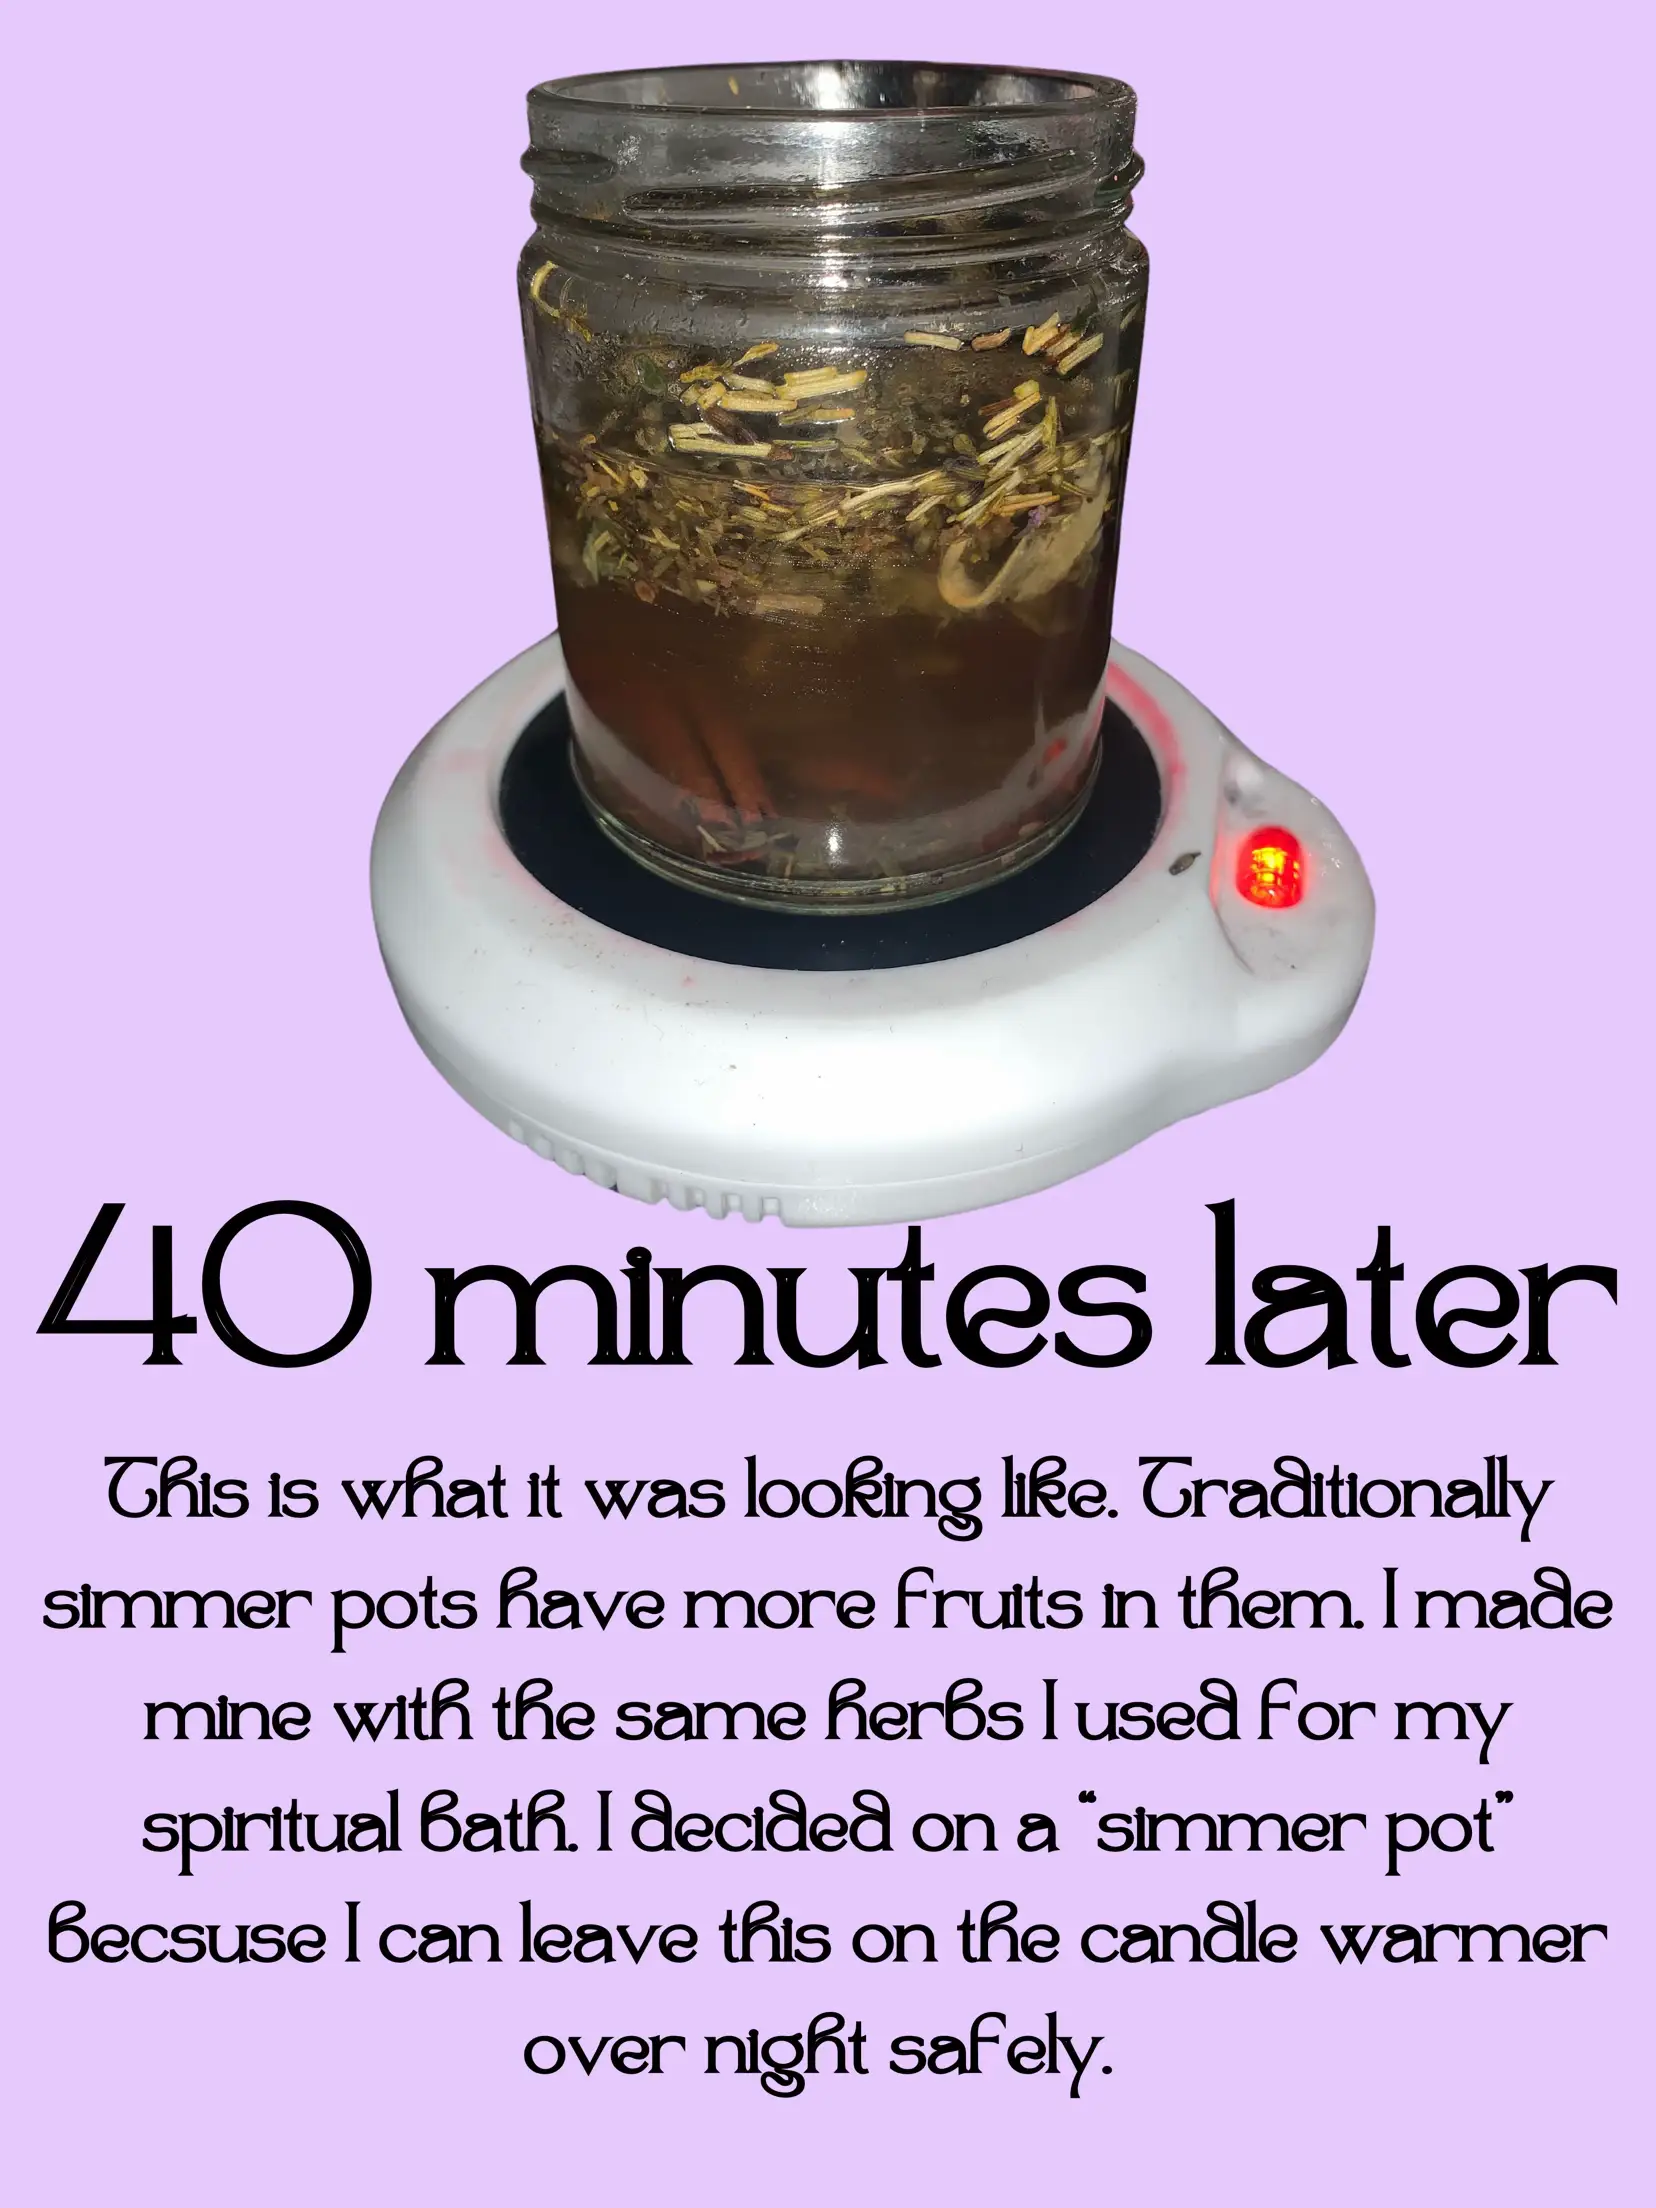 How to make a mini “Simmer pot”, Gallery posted by Jol